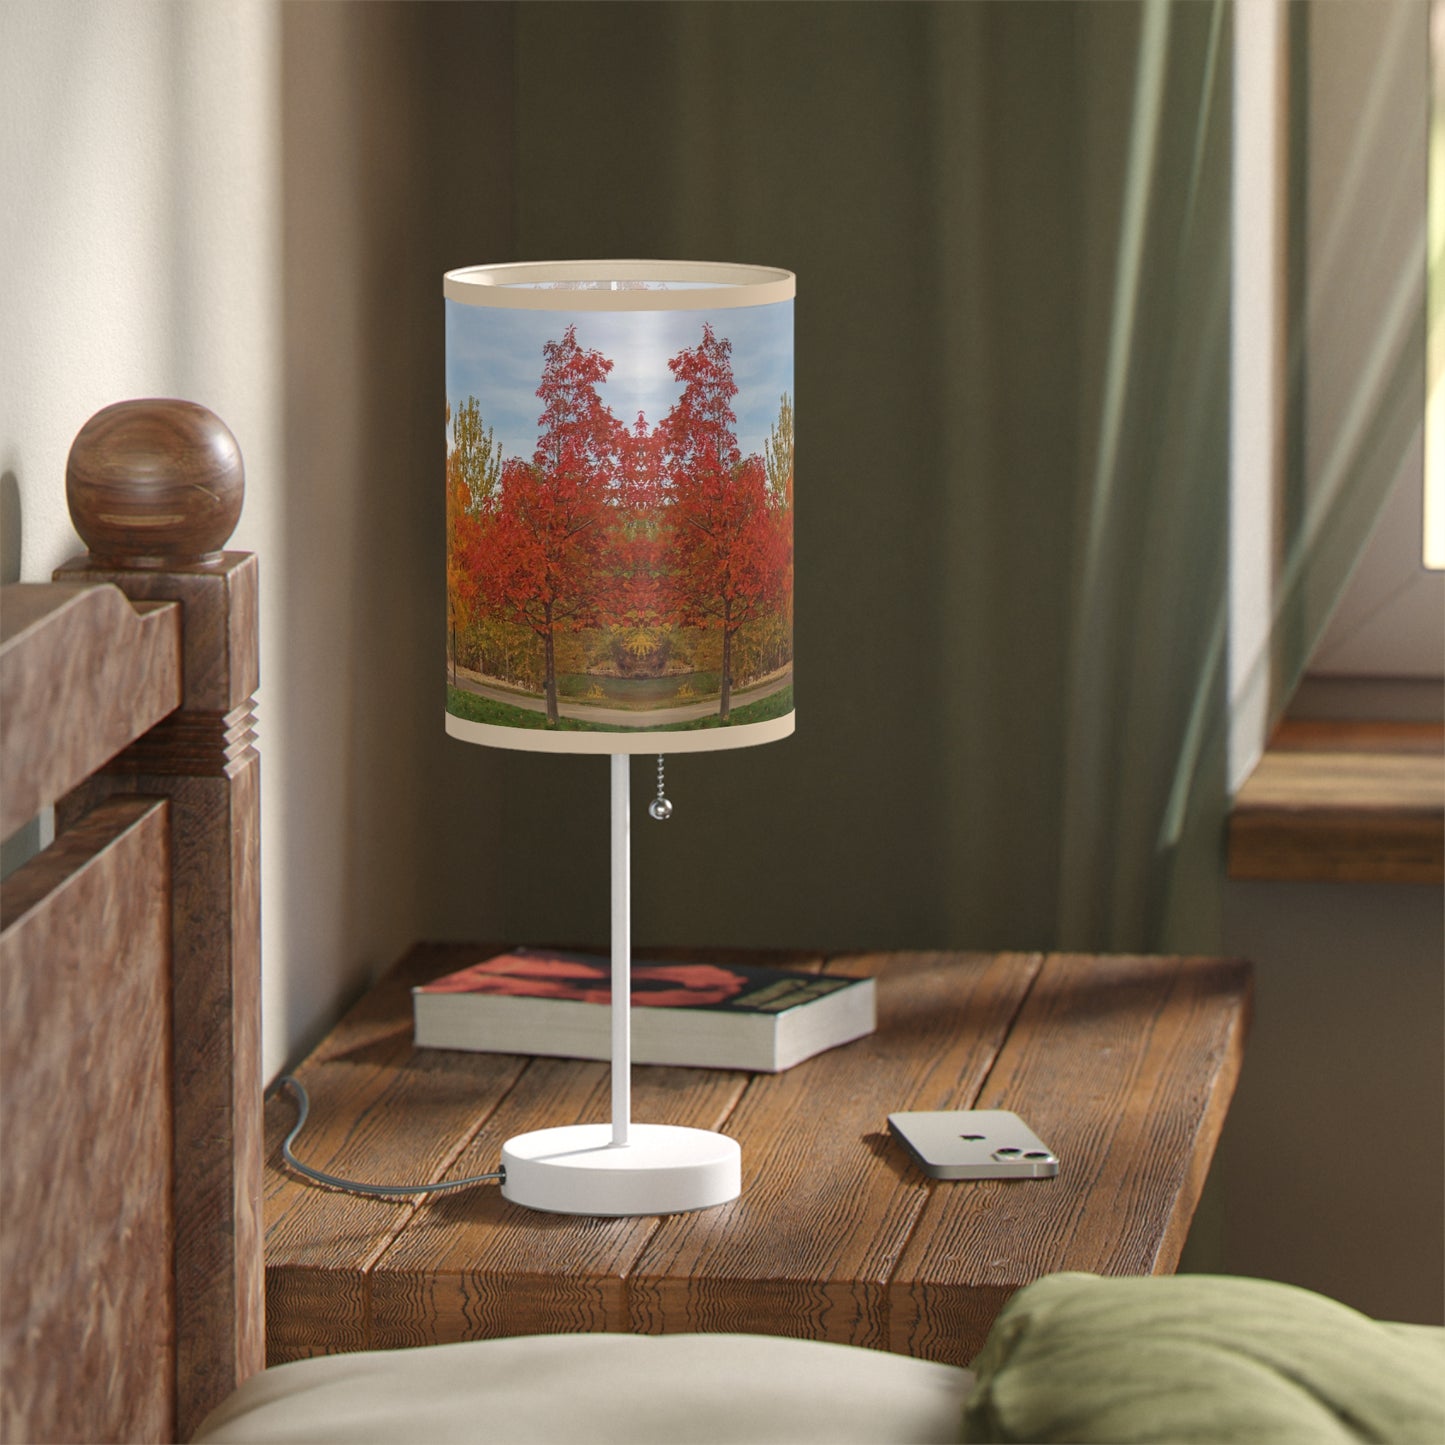 Autumn Serenity Lamp on a Stand